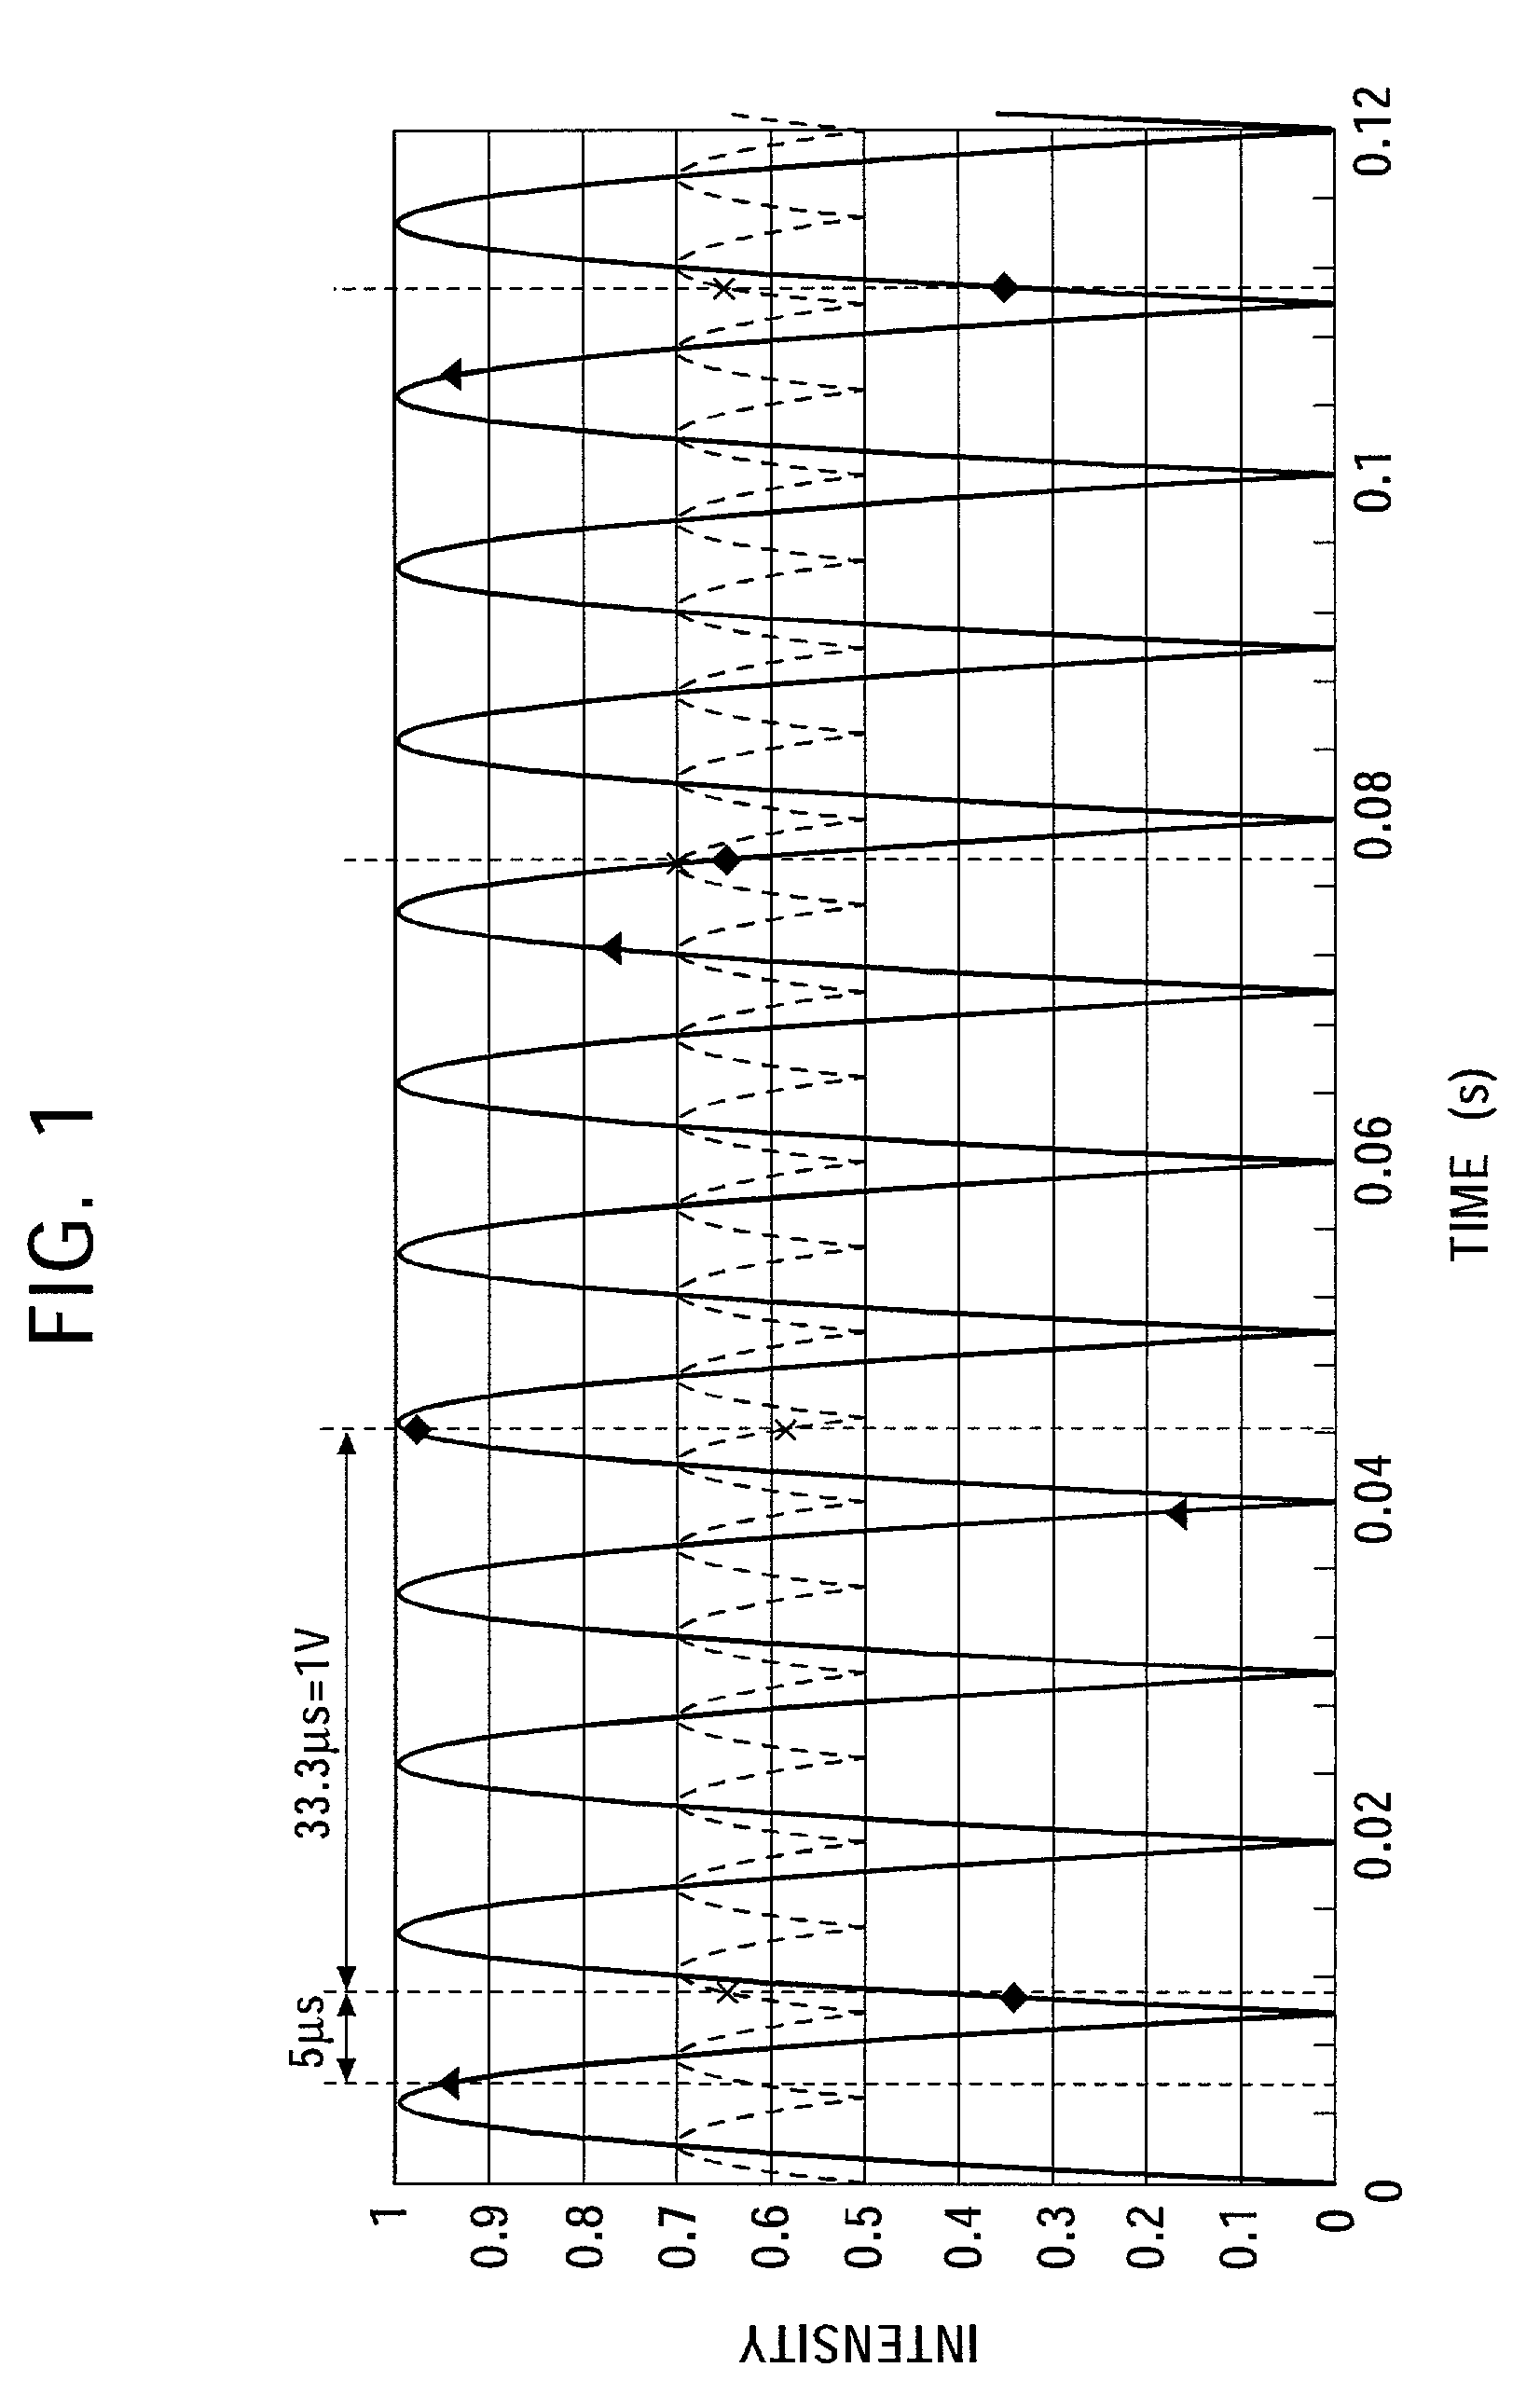 Solid-state image pickup exposure control system and method